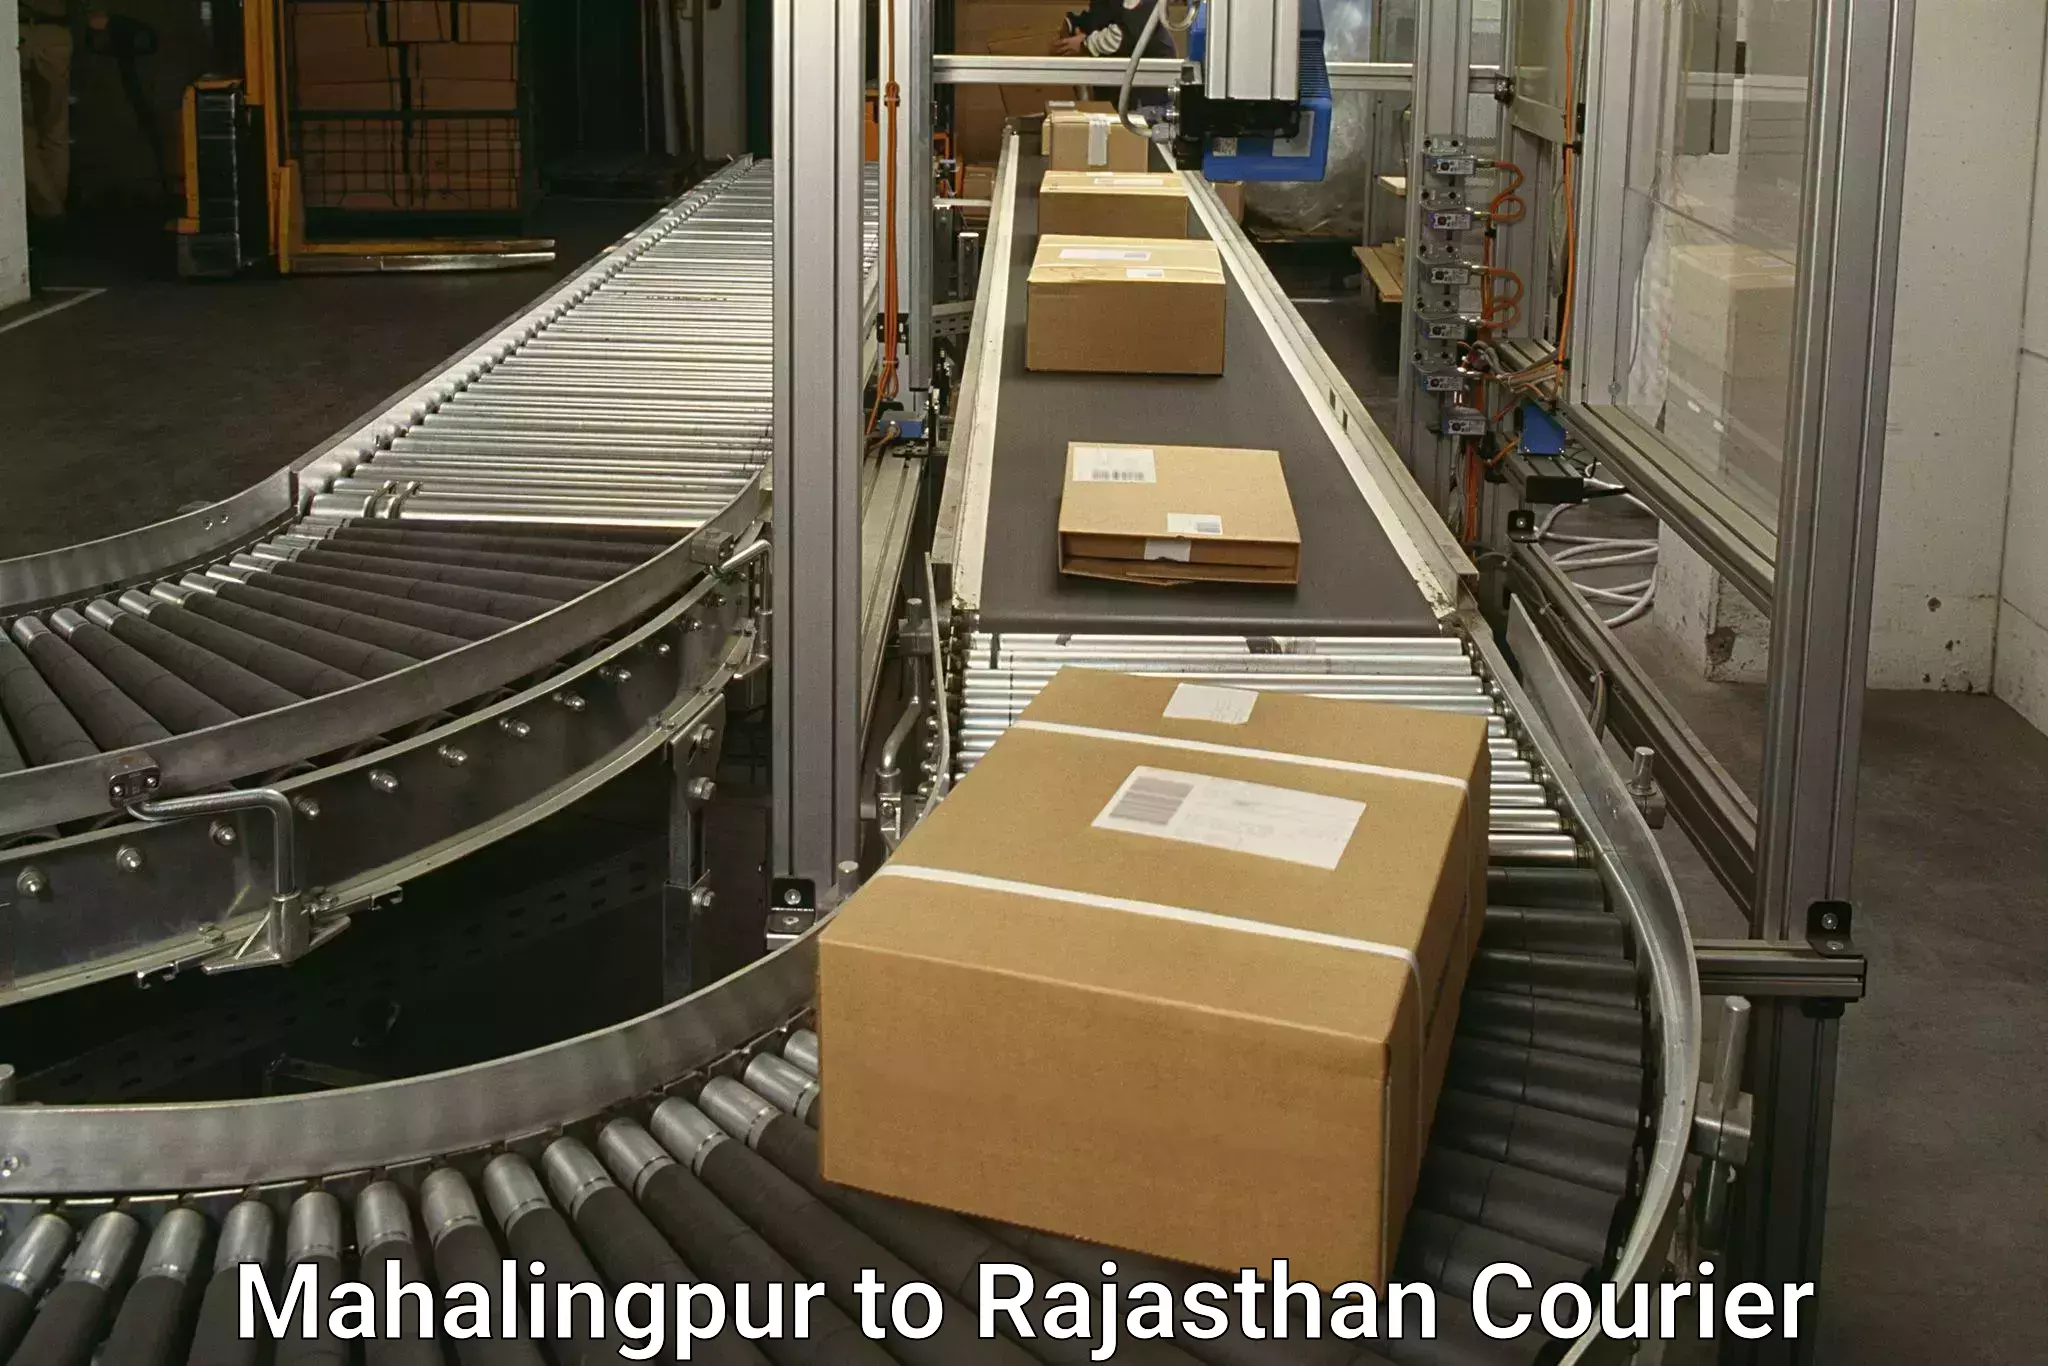 Courier service efficiency in Mahalingpur to Rajasthan